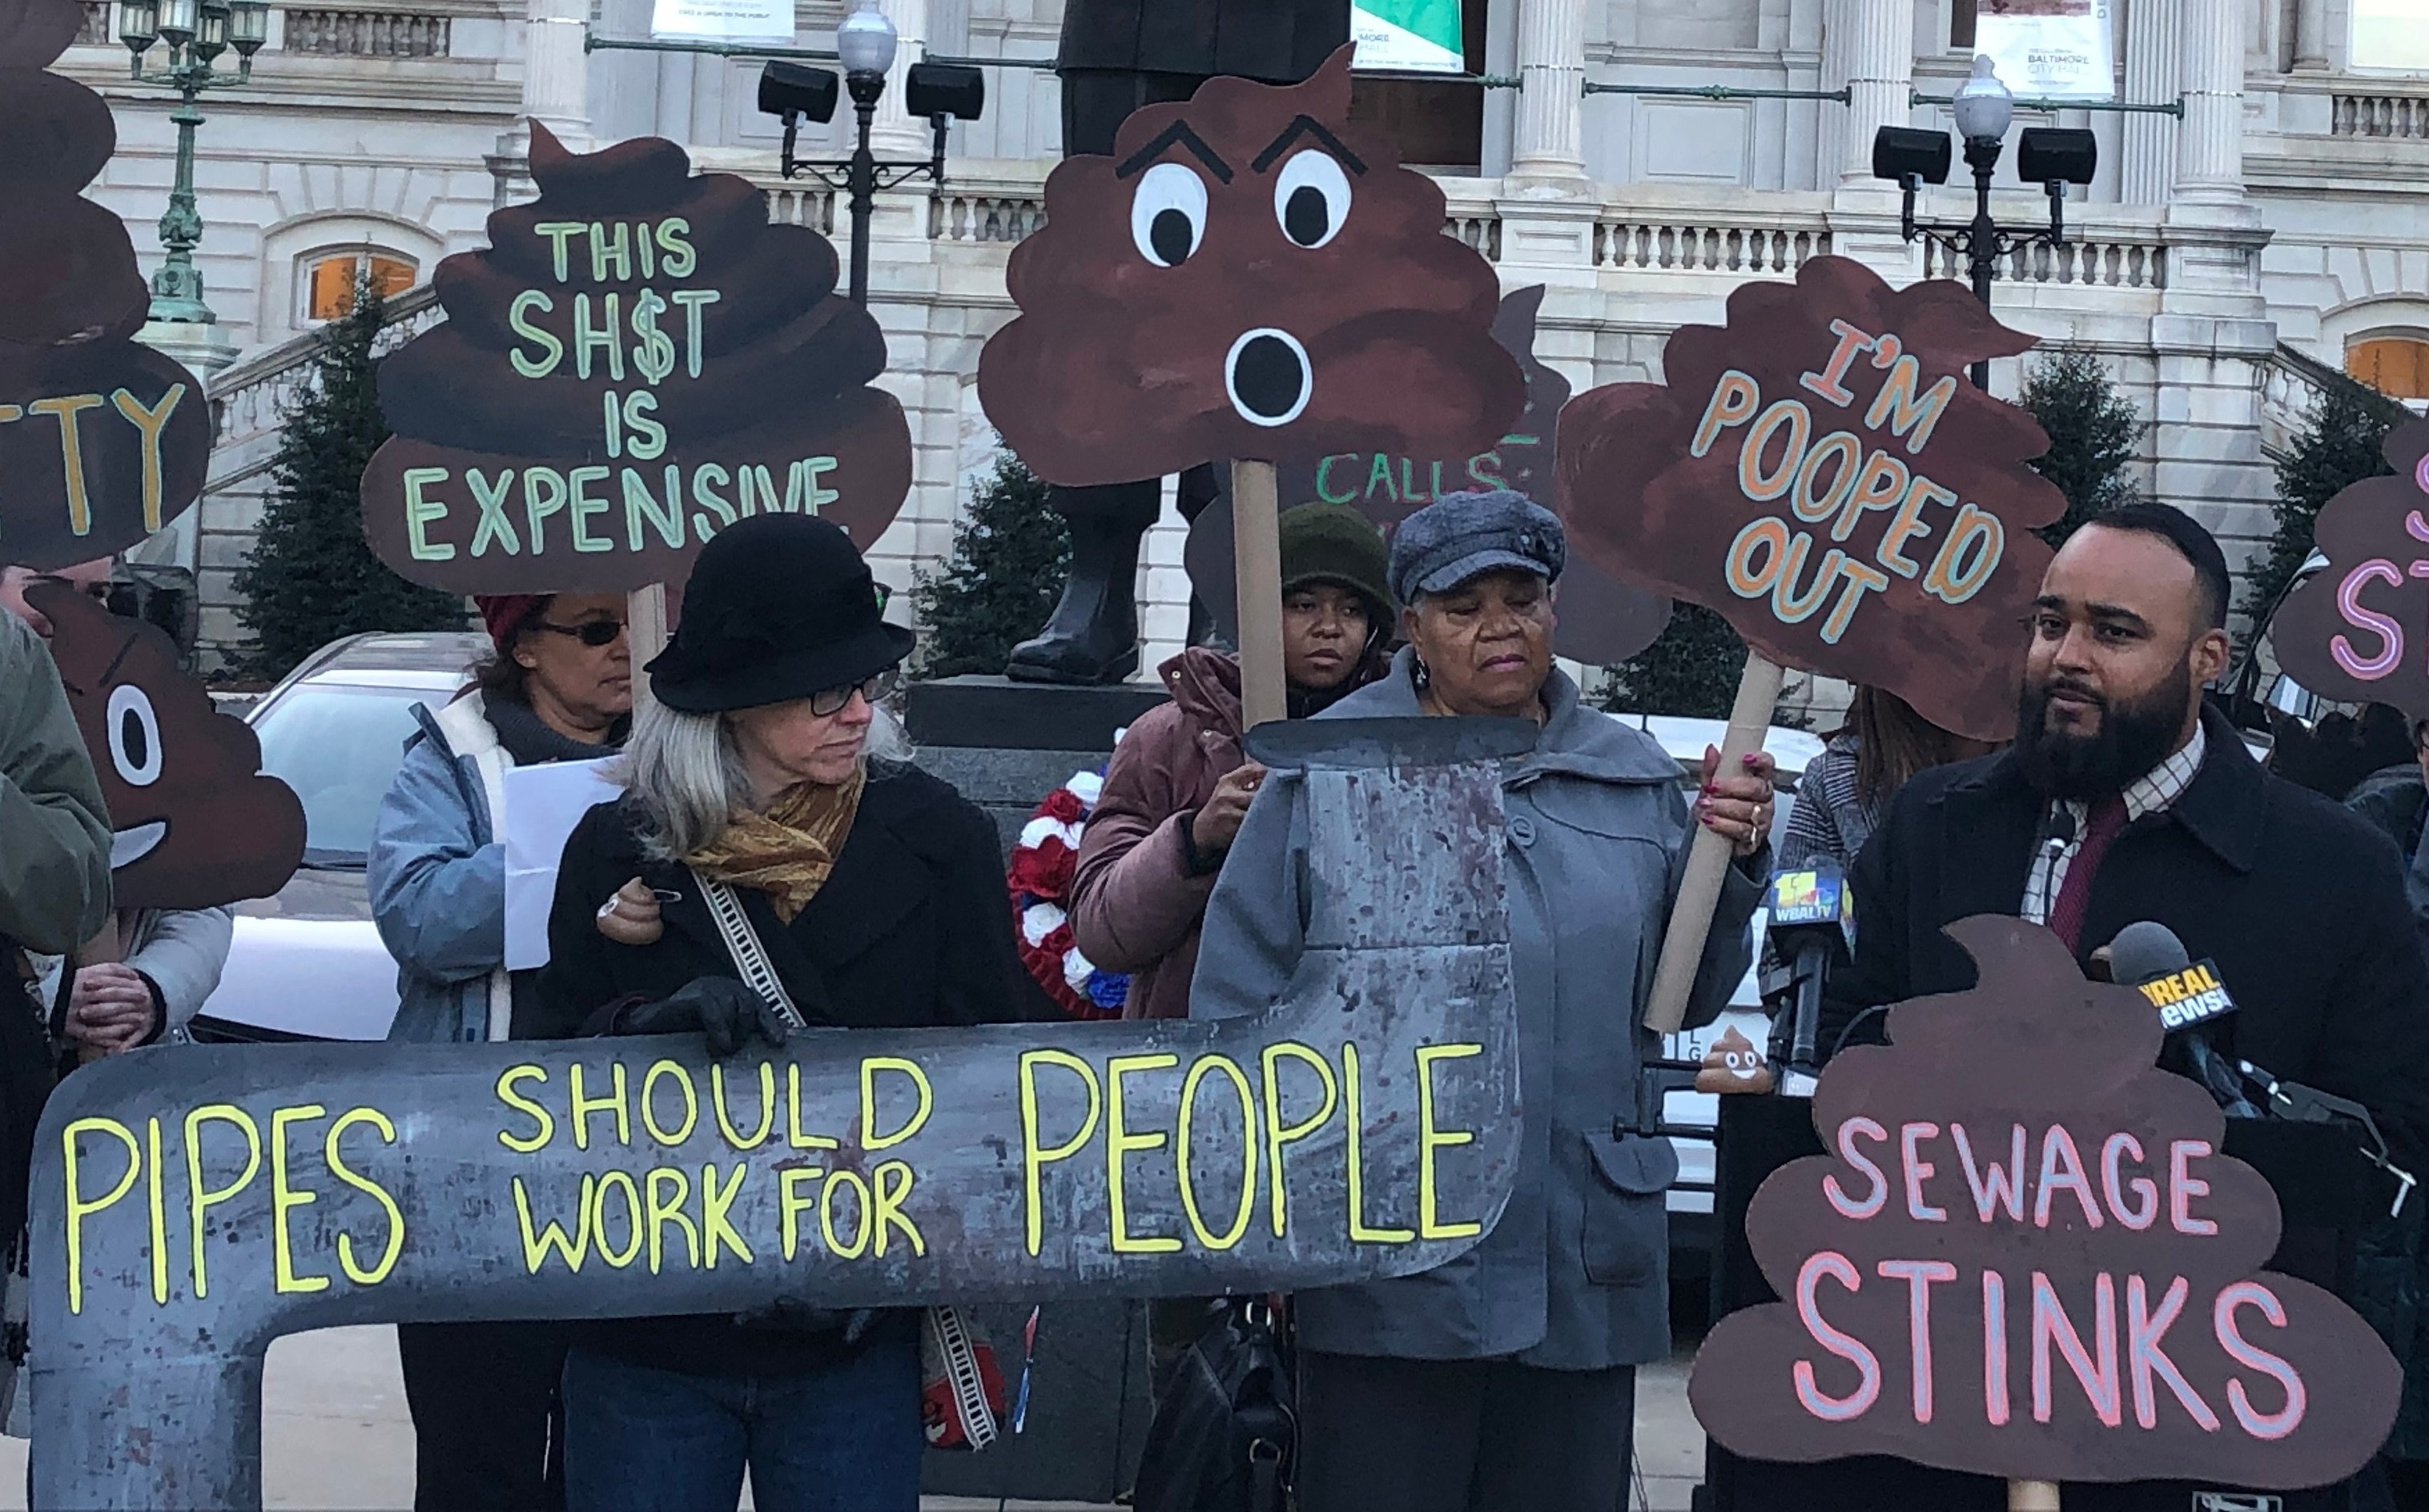 People rallying in front of Baltimore City Hall holding signs like "Pipes should work for People."